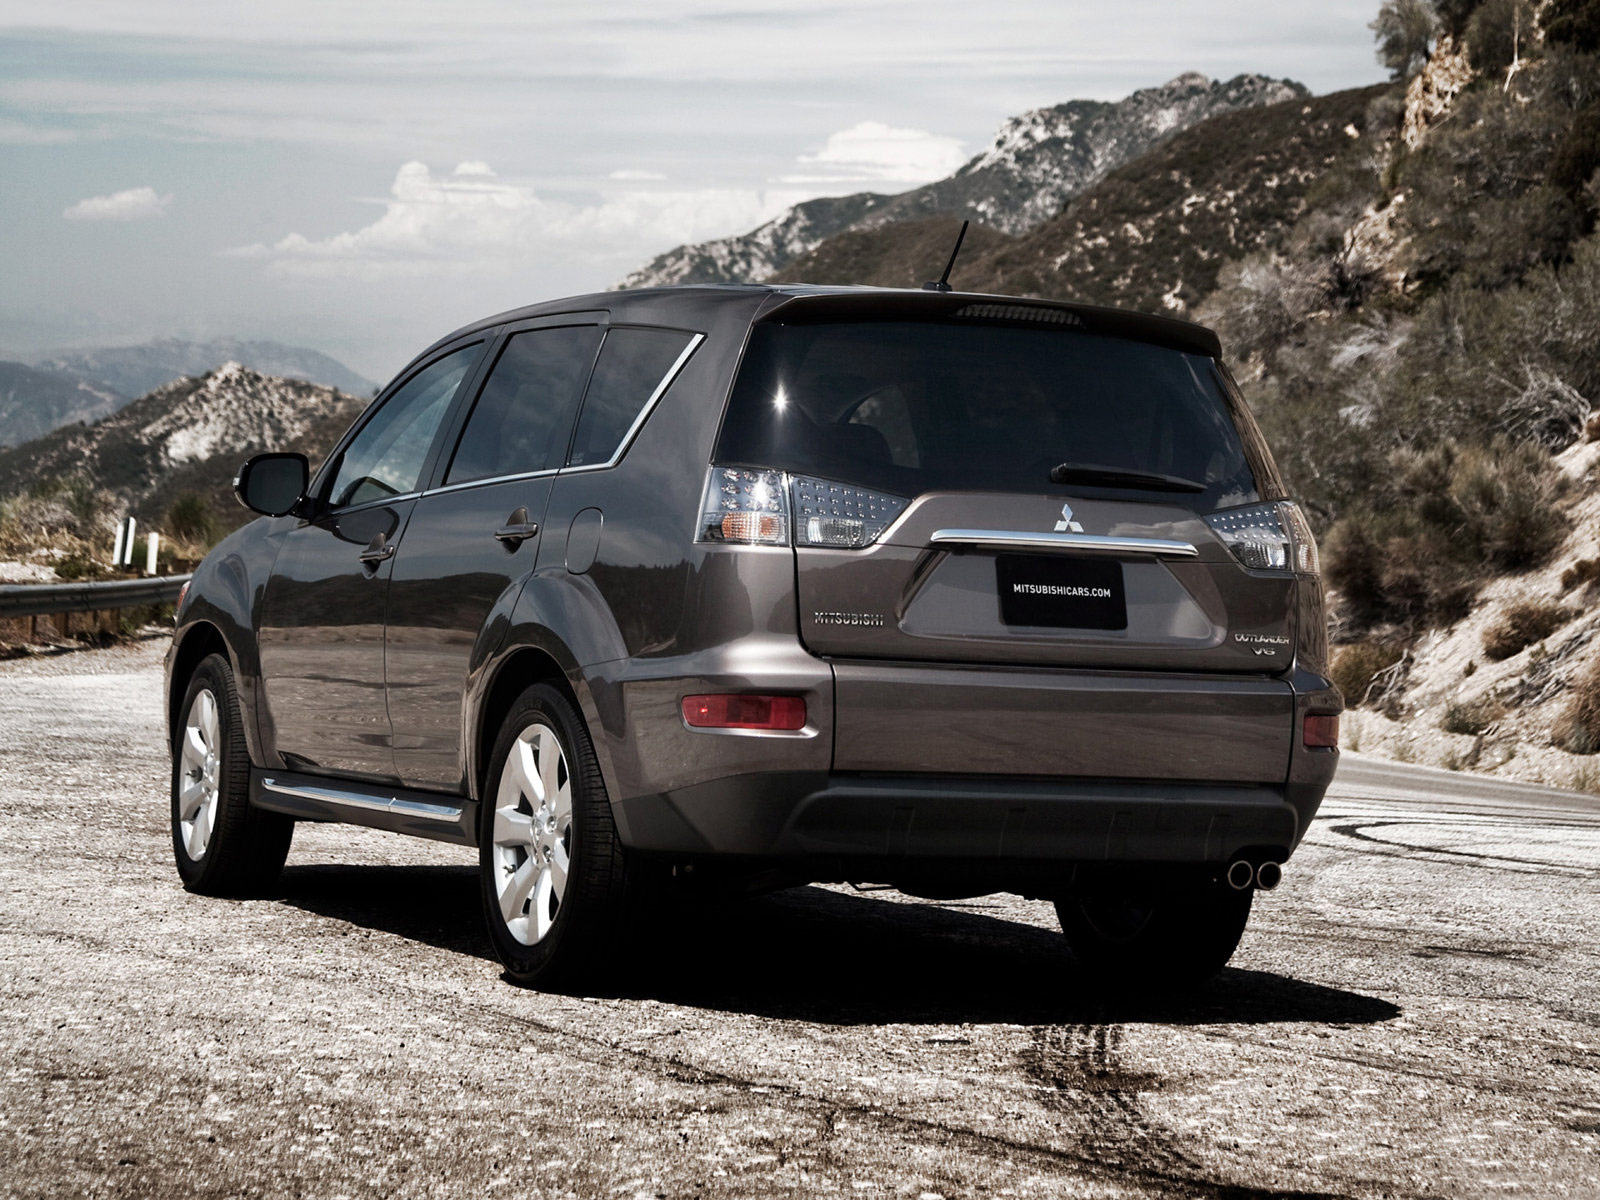 2010 MITSUBISHI Outlander GT photos | Accident lawyers info.